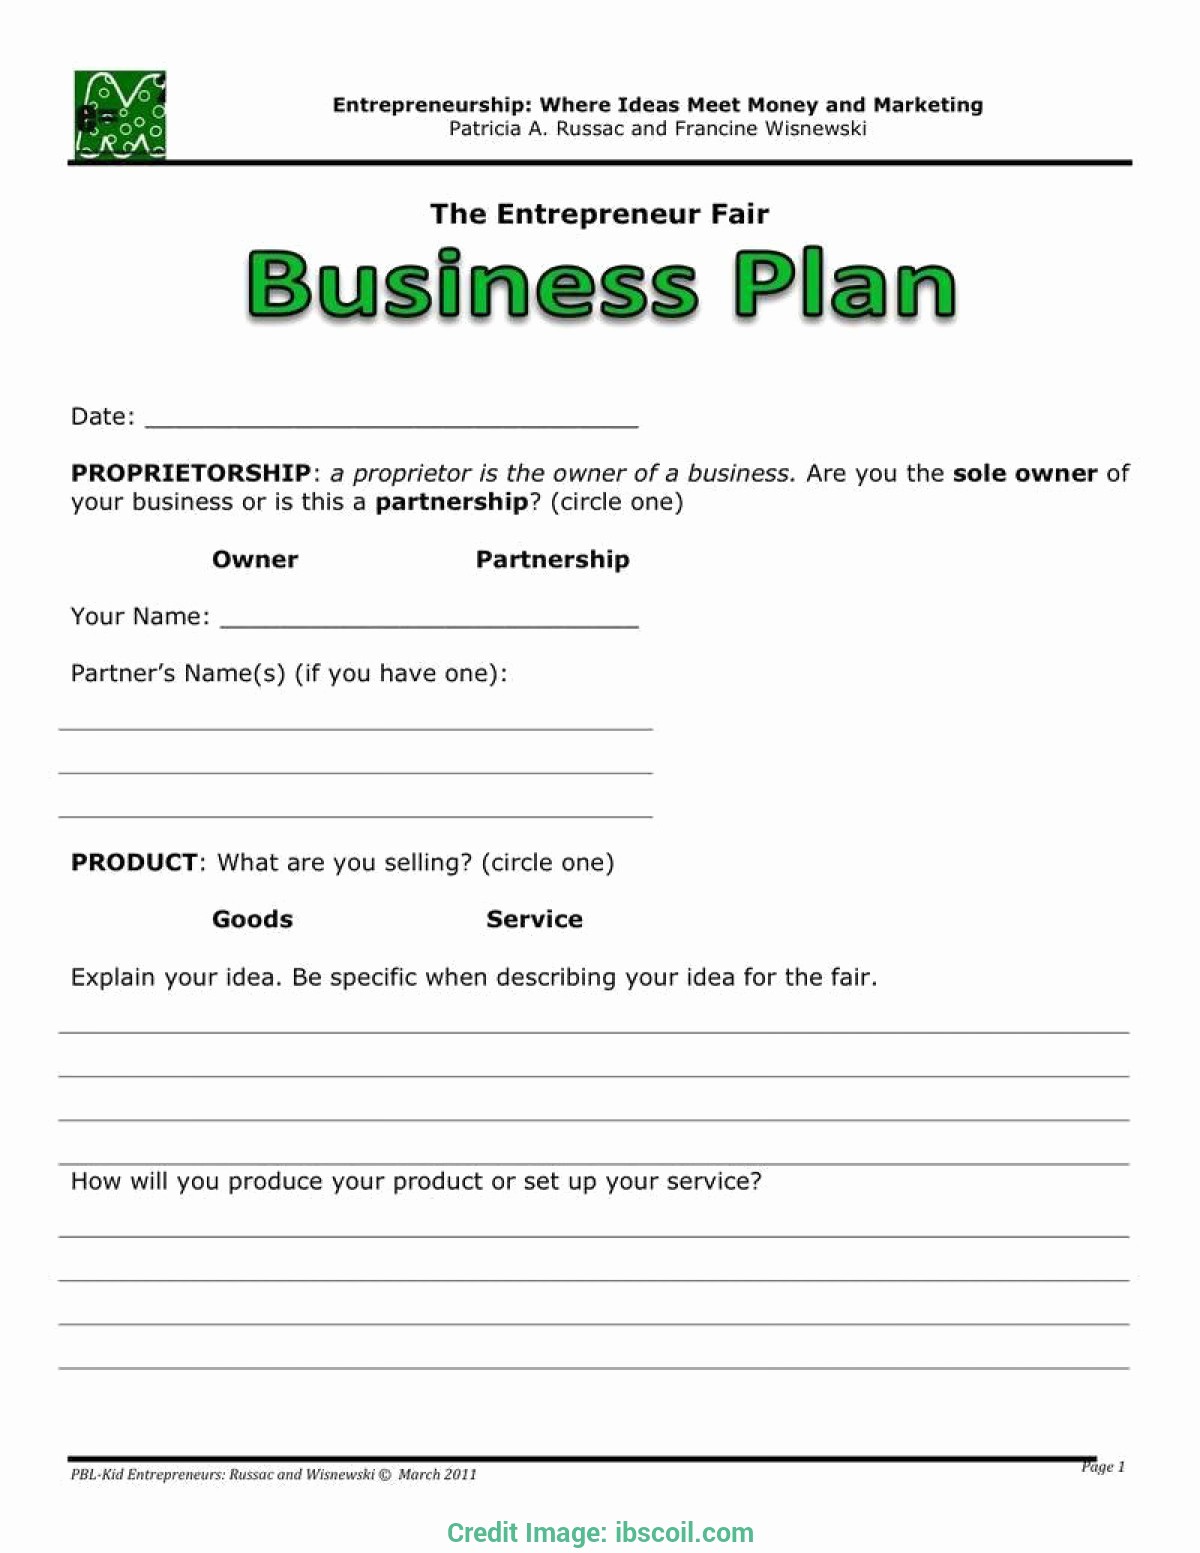 Business Plan Template .doc Inspirational Page Templates Fill In the Blank Business Plan Template